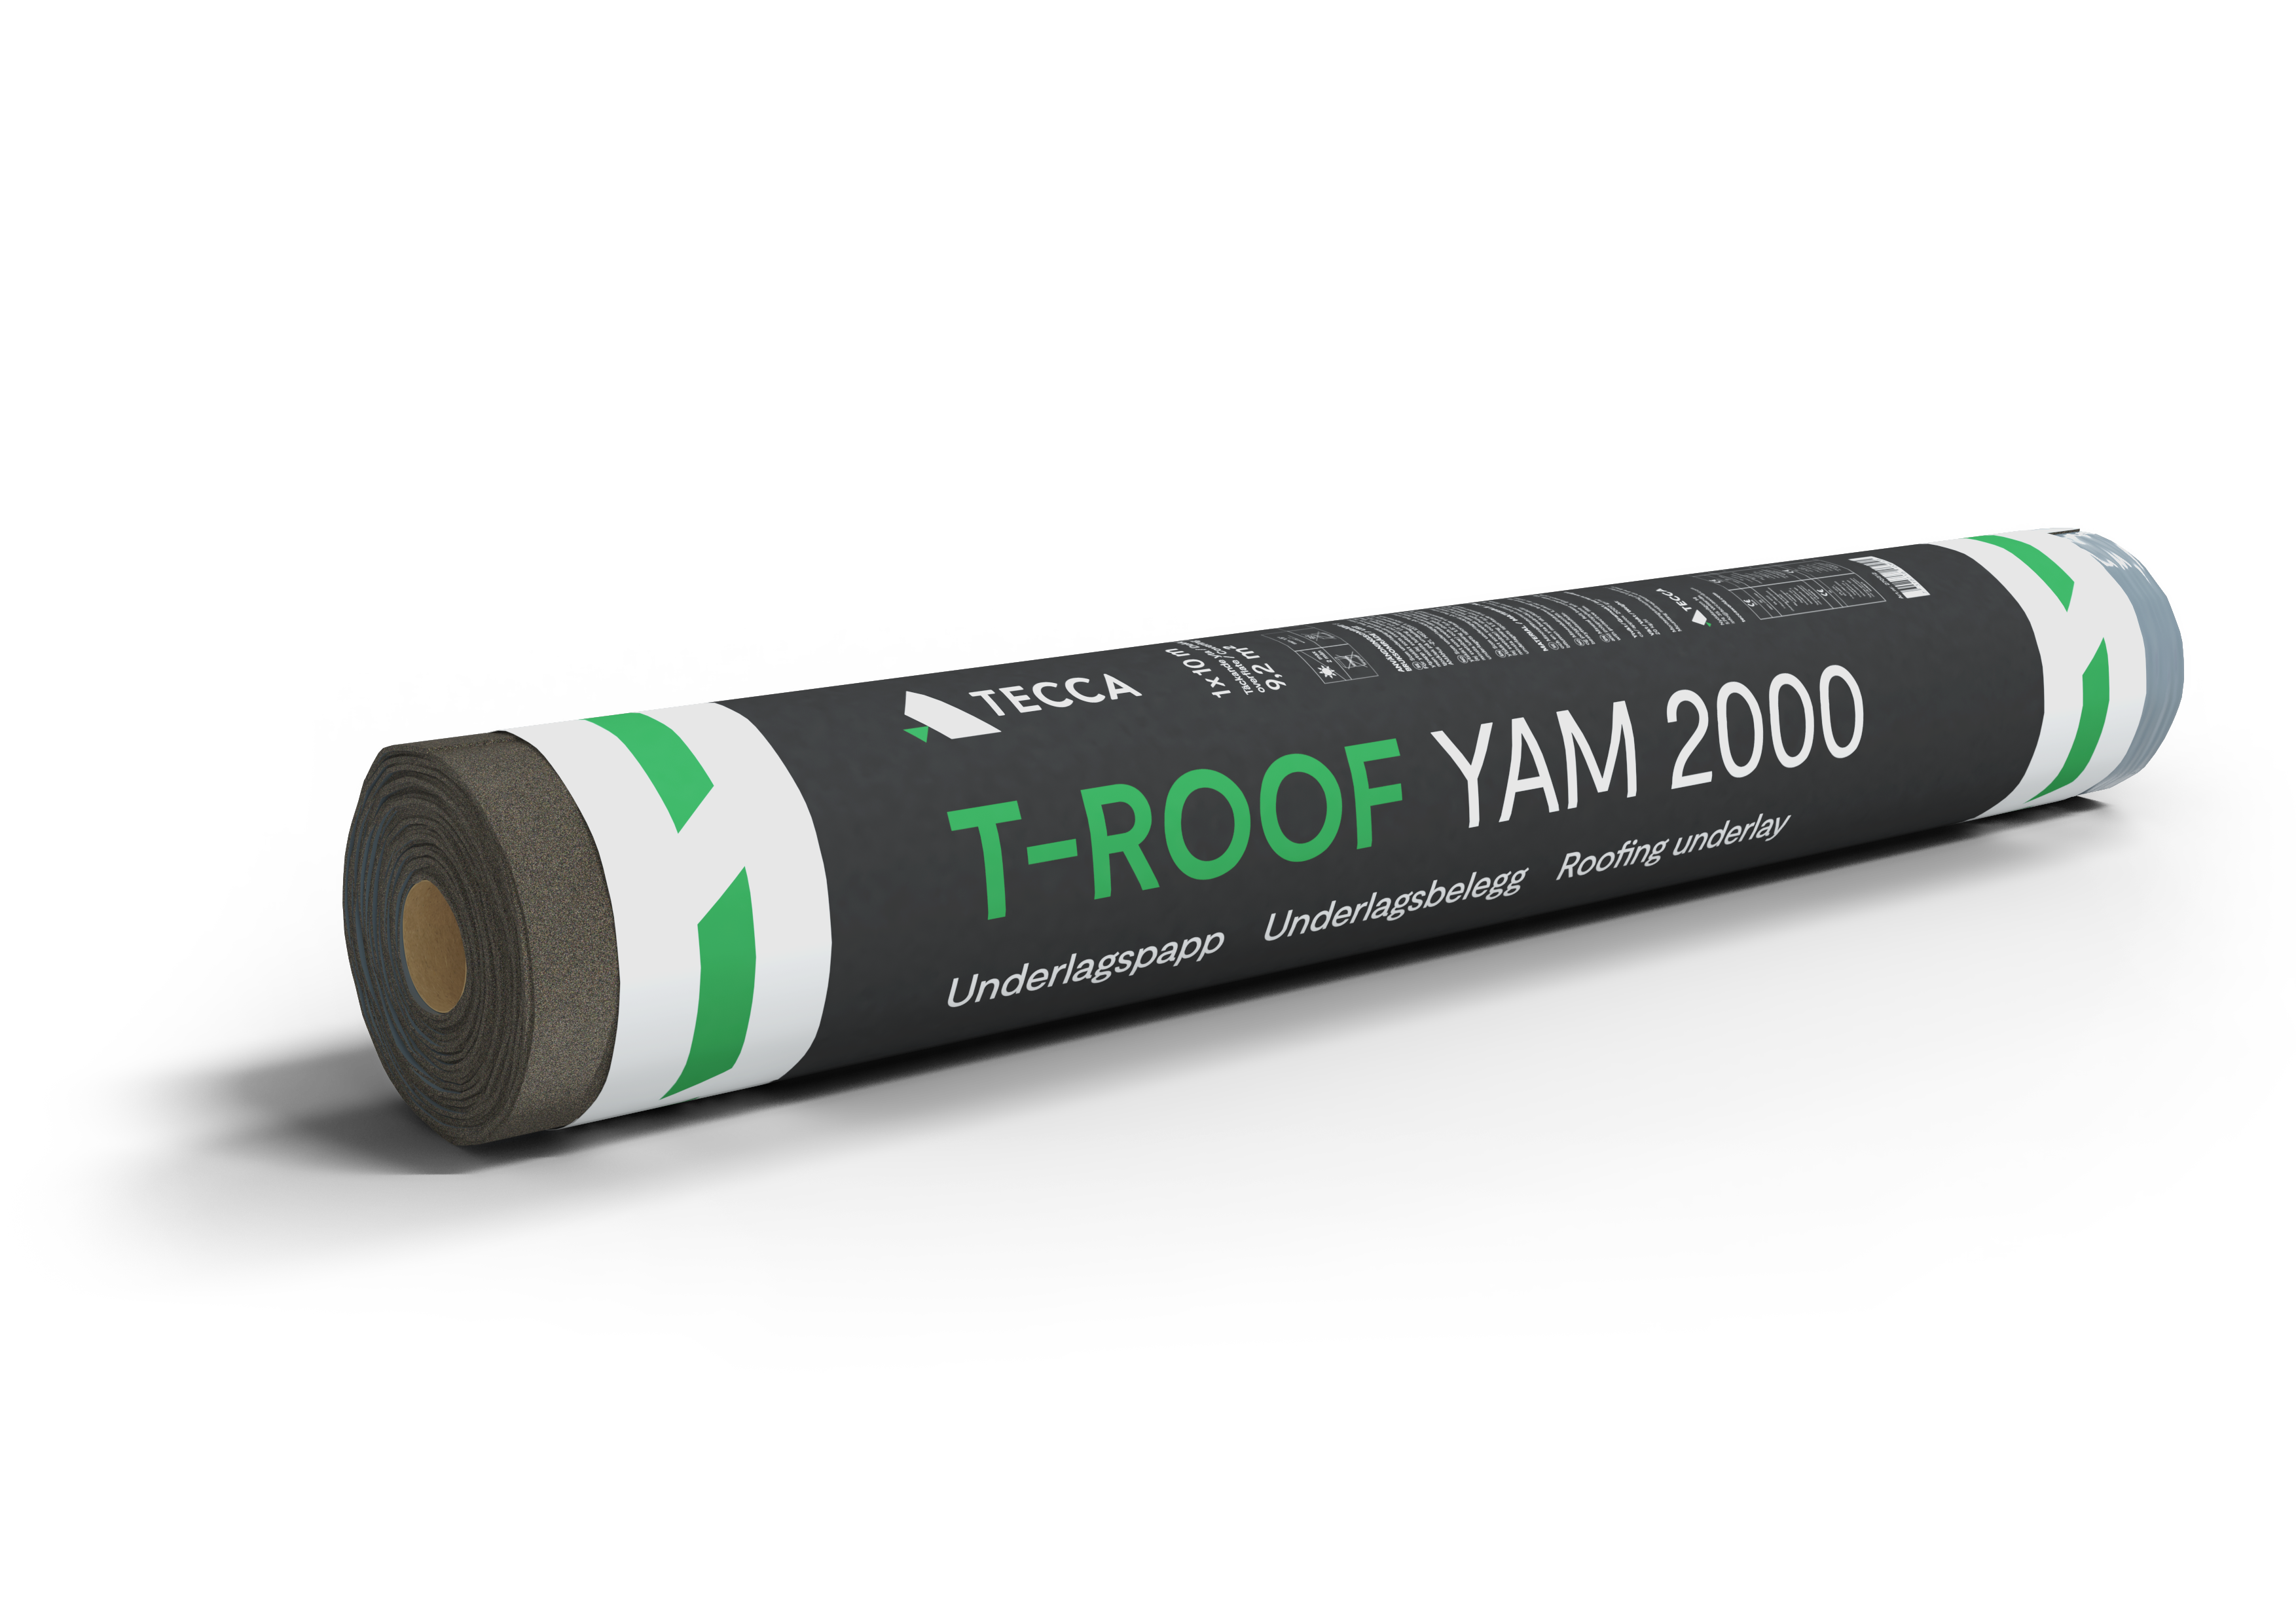 T-Roof YAM 2000